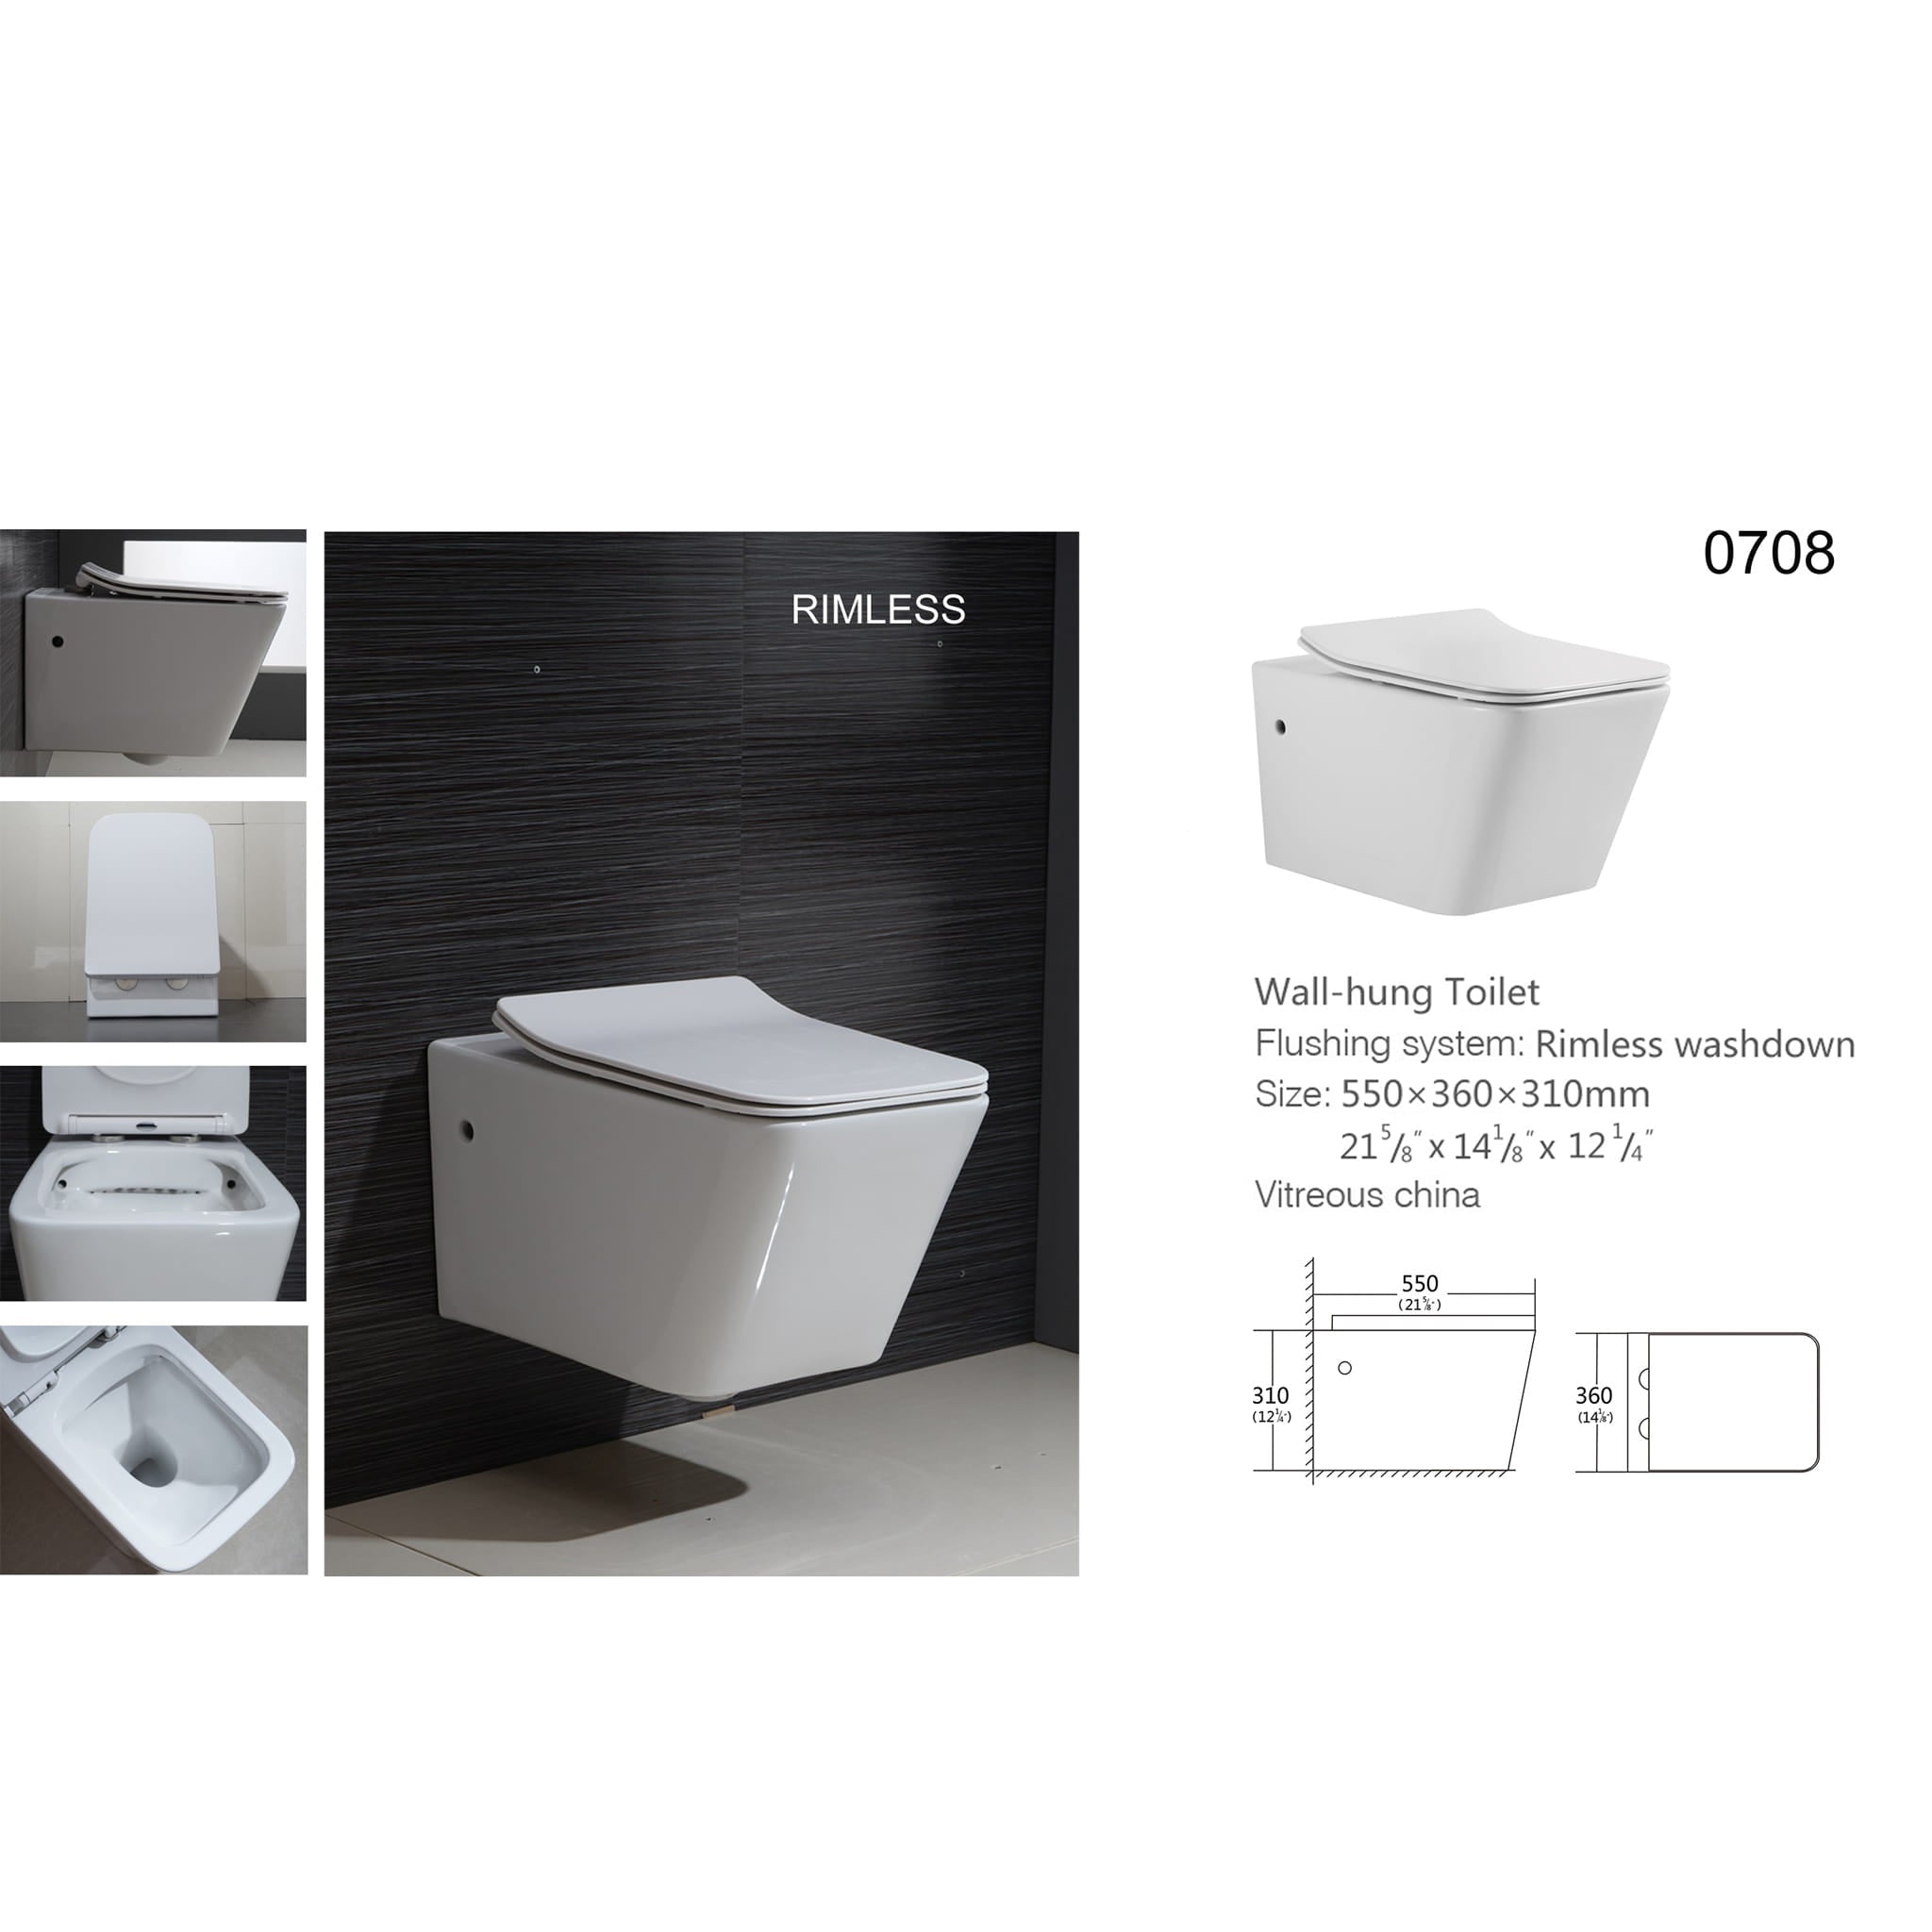 Aquamoon 708 Square Wall-Hung Dual Flush Elongated One Piece Toilet with Soft Closing Seat, Water Sense, High-Efficiency, Color White